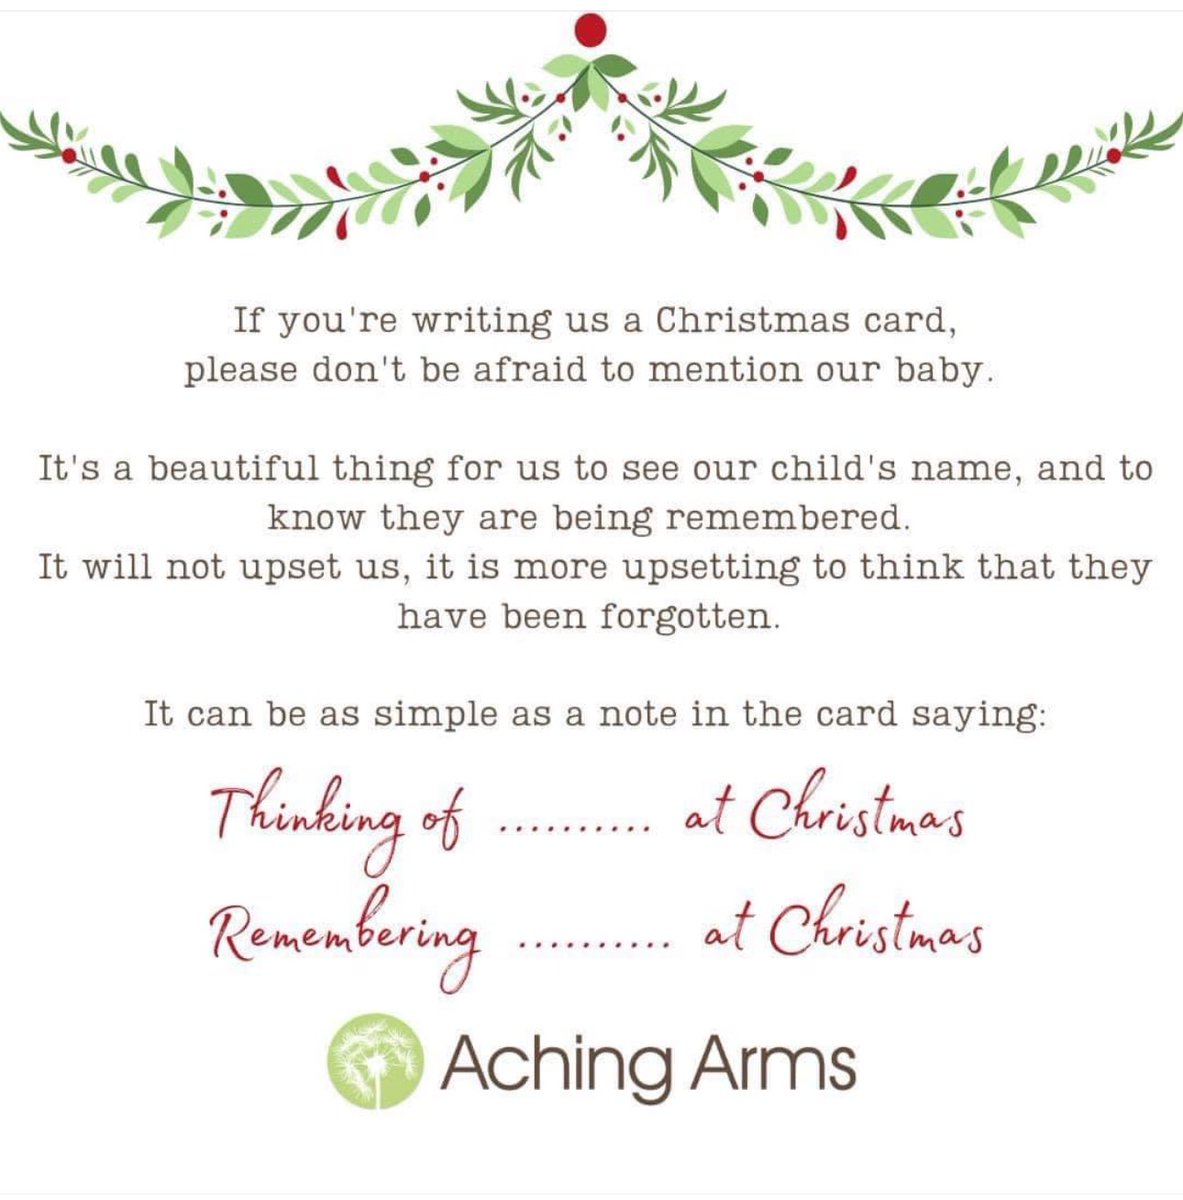 🧡 #NGAW23 @AchingArms 🧡 #saytheirname This may help friends and family to support someone who is grieving this Christmas.